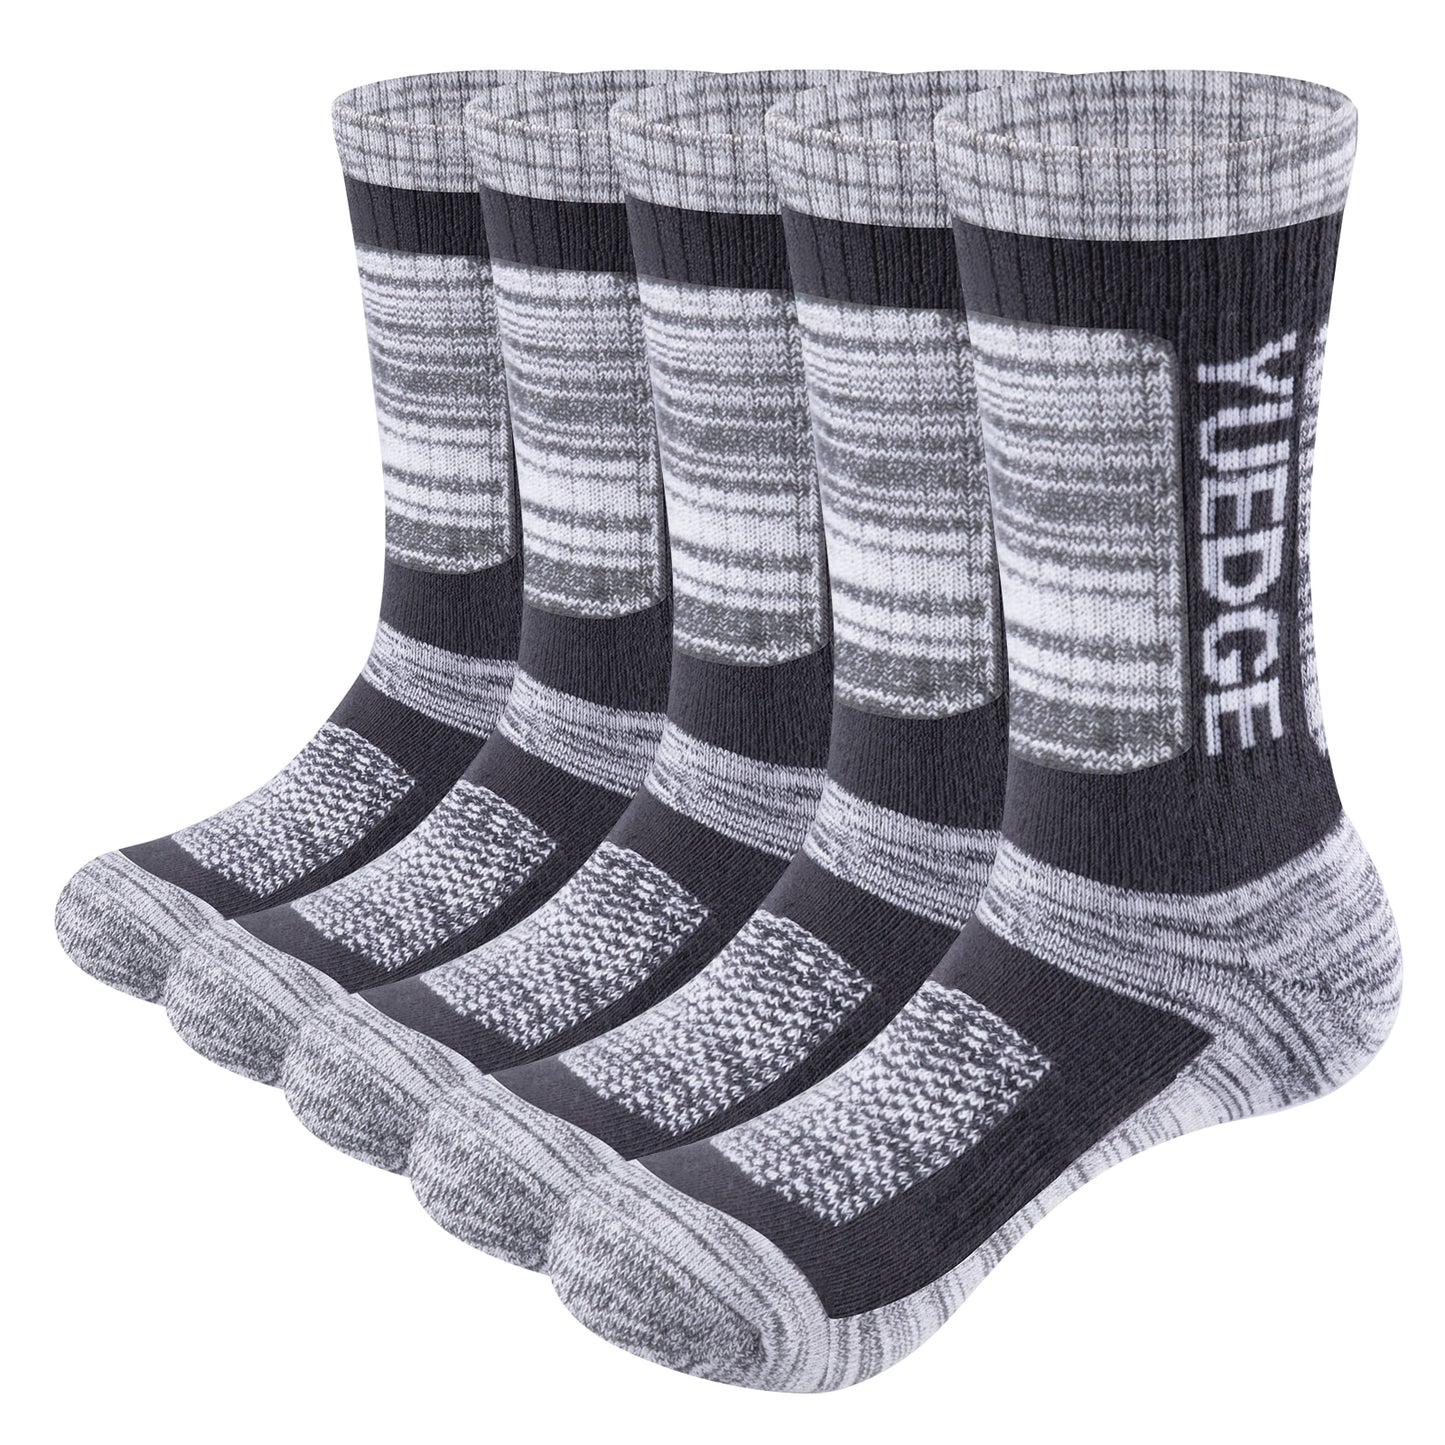 YUEDGE Womens Moisture Wicking Hiking Socks Cushioned Combed Cotton Mid Calf Thick Thermal Athletic Socks For Size 36-44, 5 Pair - Bonnie Lassio